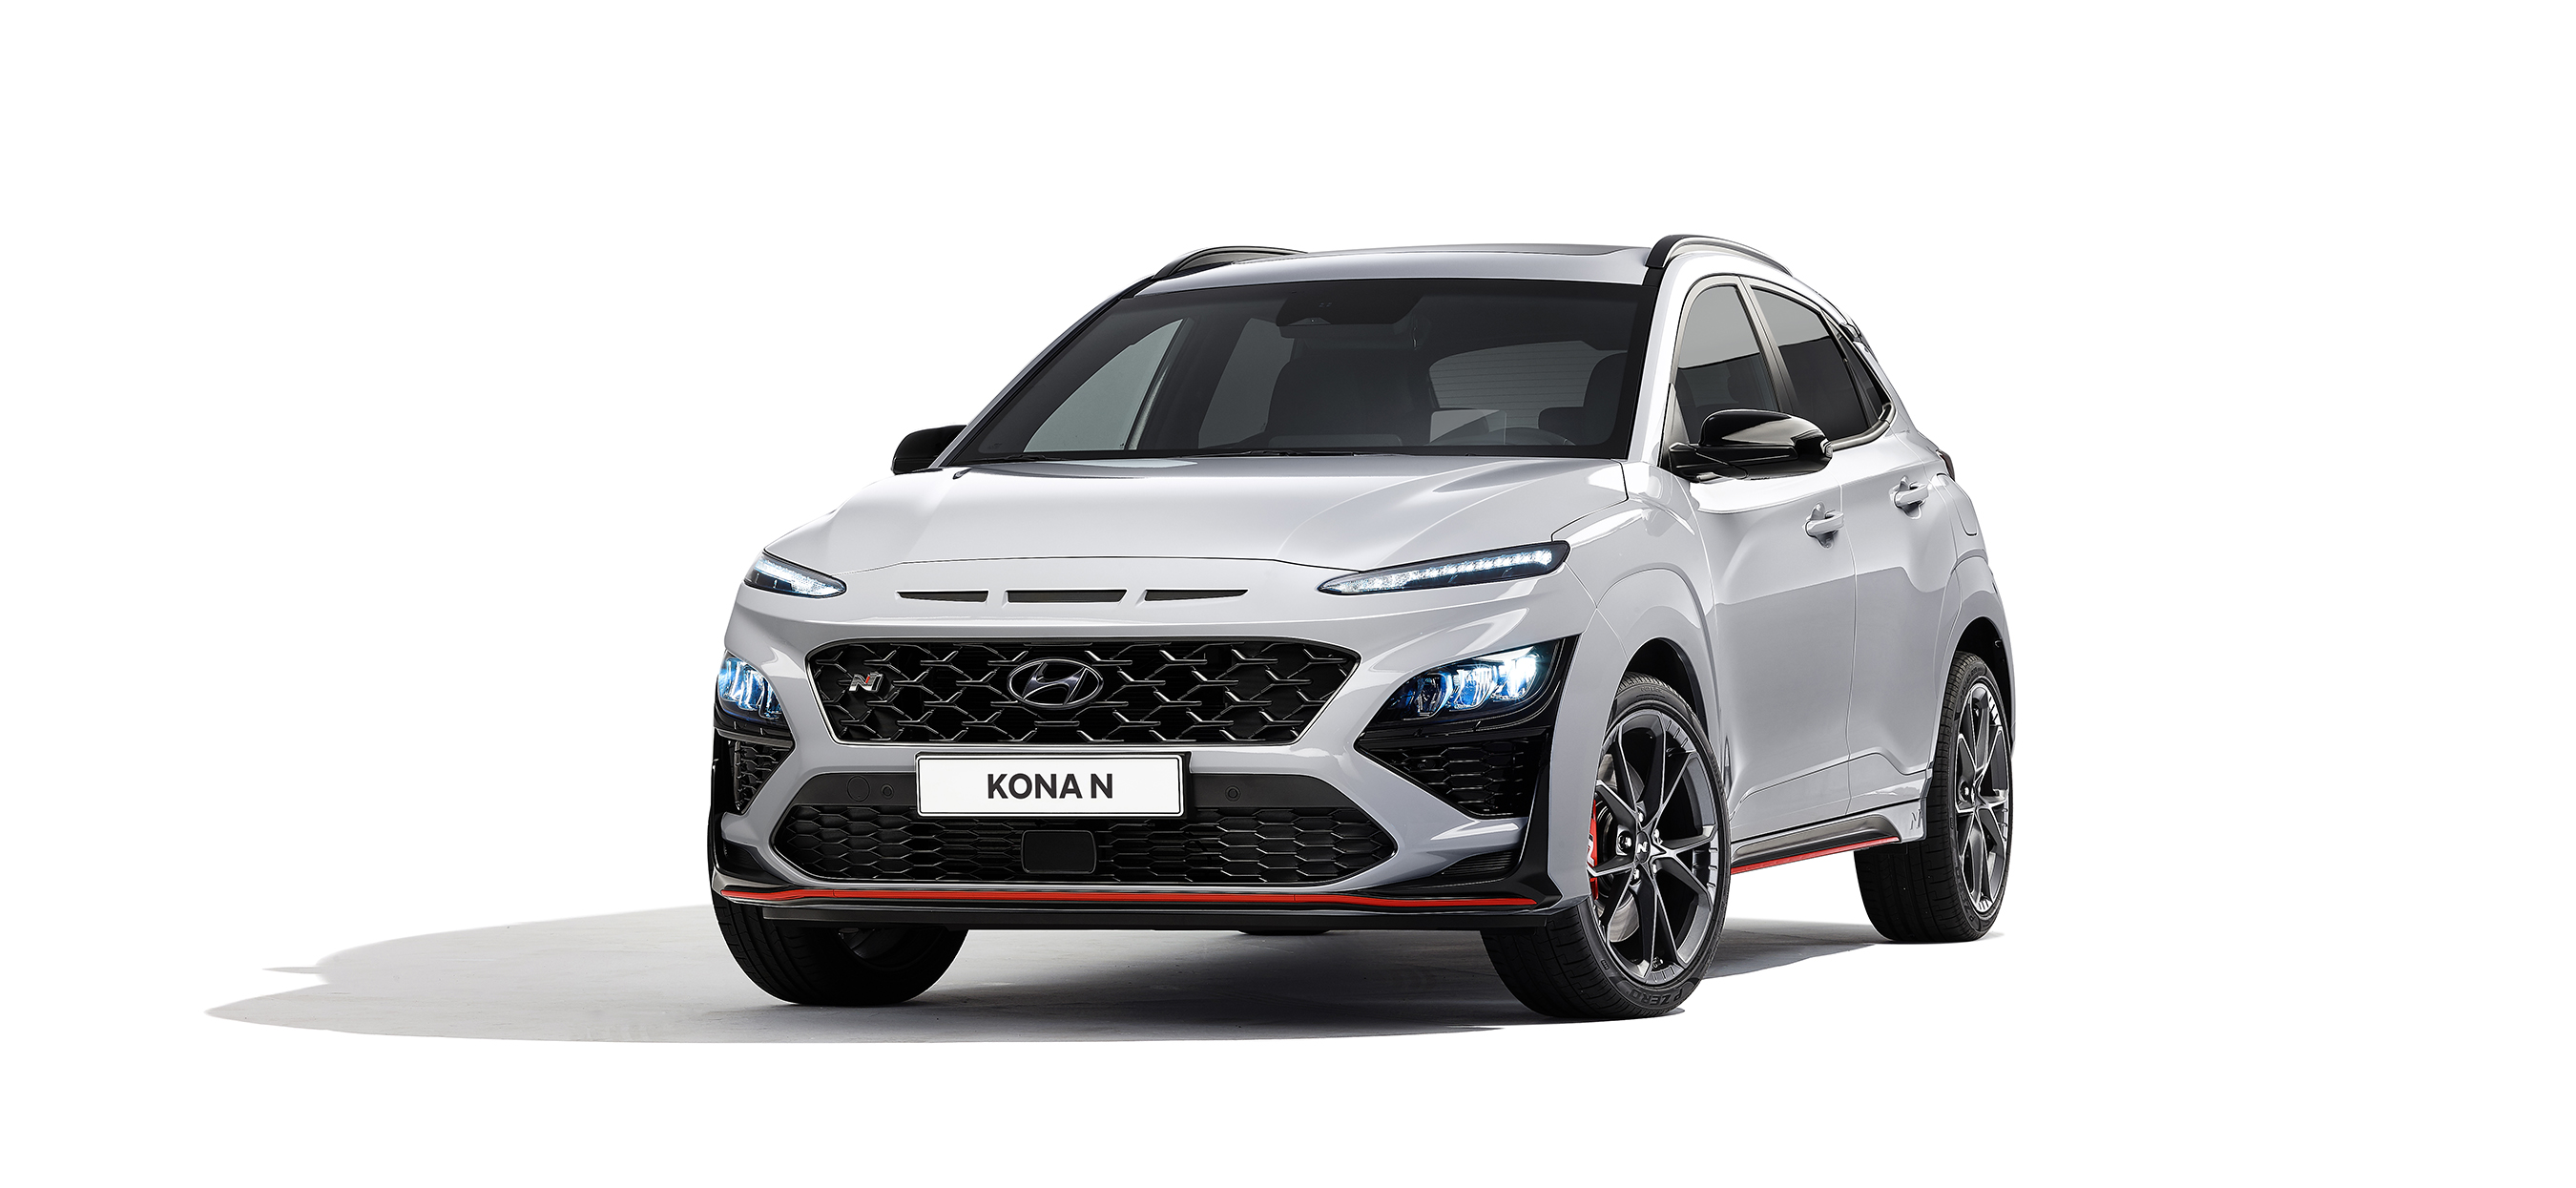 Hyundai Motor Company today unveiled the all-new KONA N as well as its high-performance philosophy and ambition for sustainable driving fun at Hyundai N Day, a digital showcase dedicated to introducing Hyundai's N Brand.